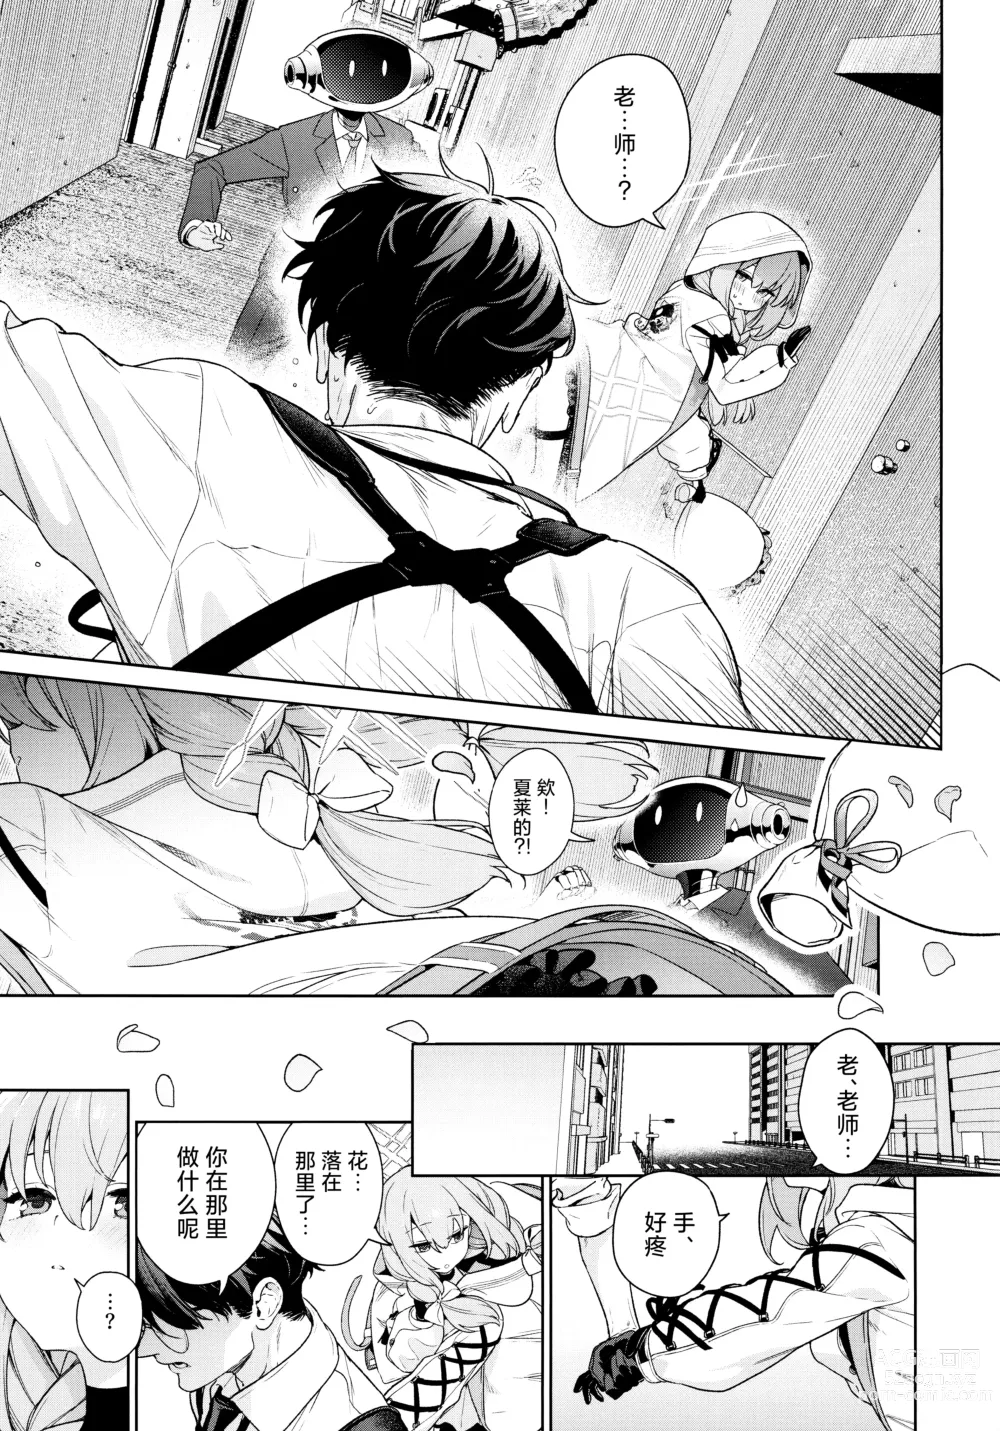 Page 7 of doujinshi 请教(管)教我